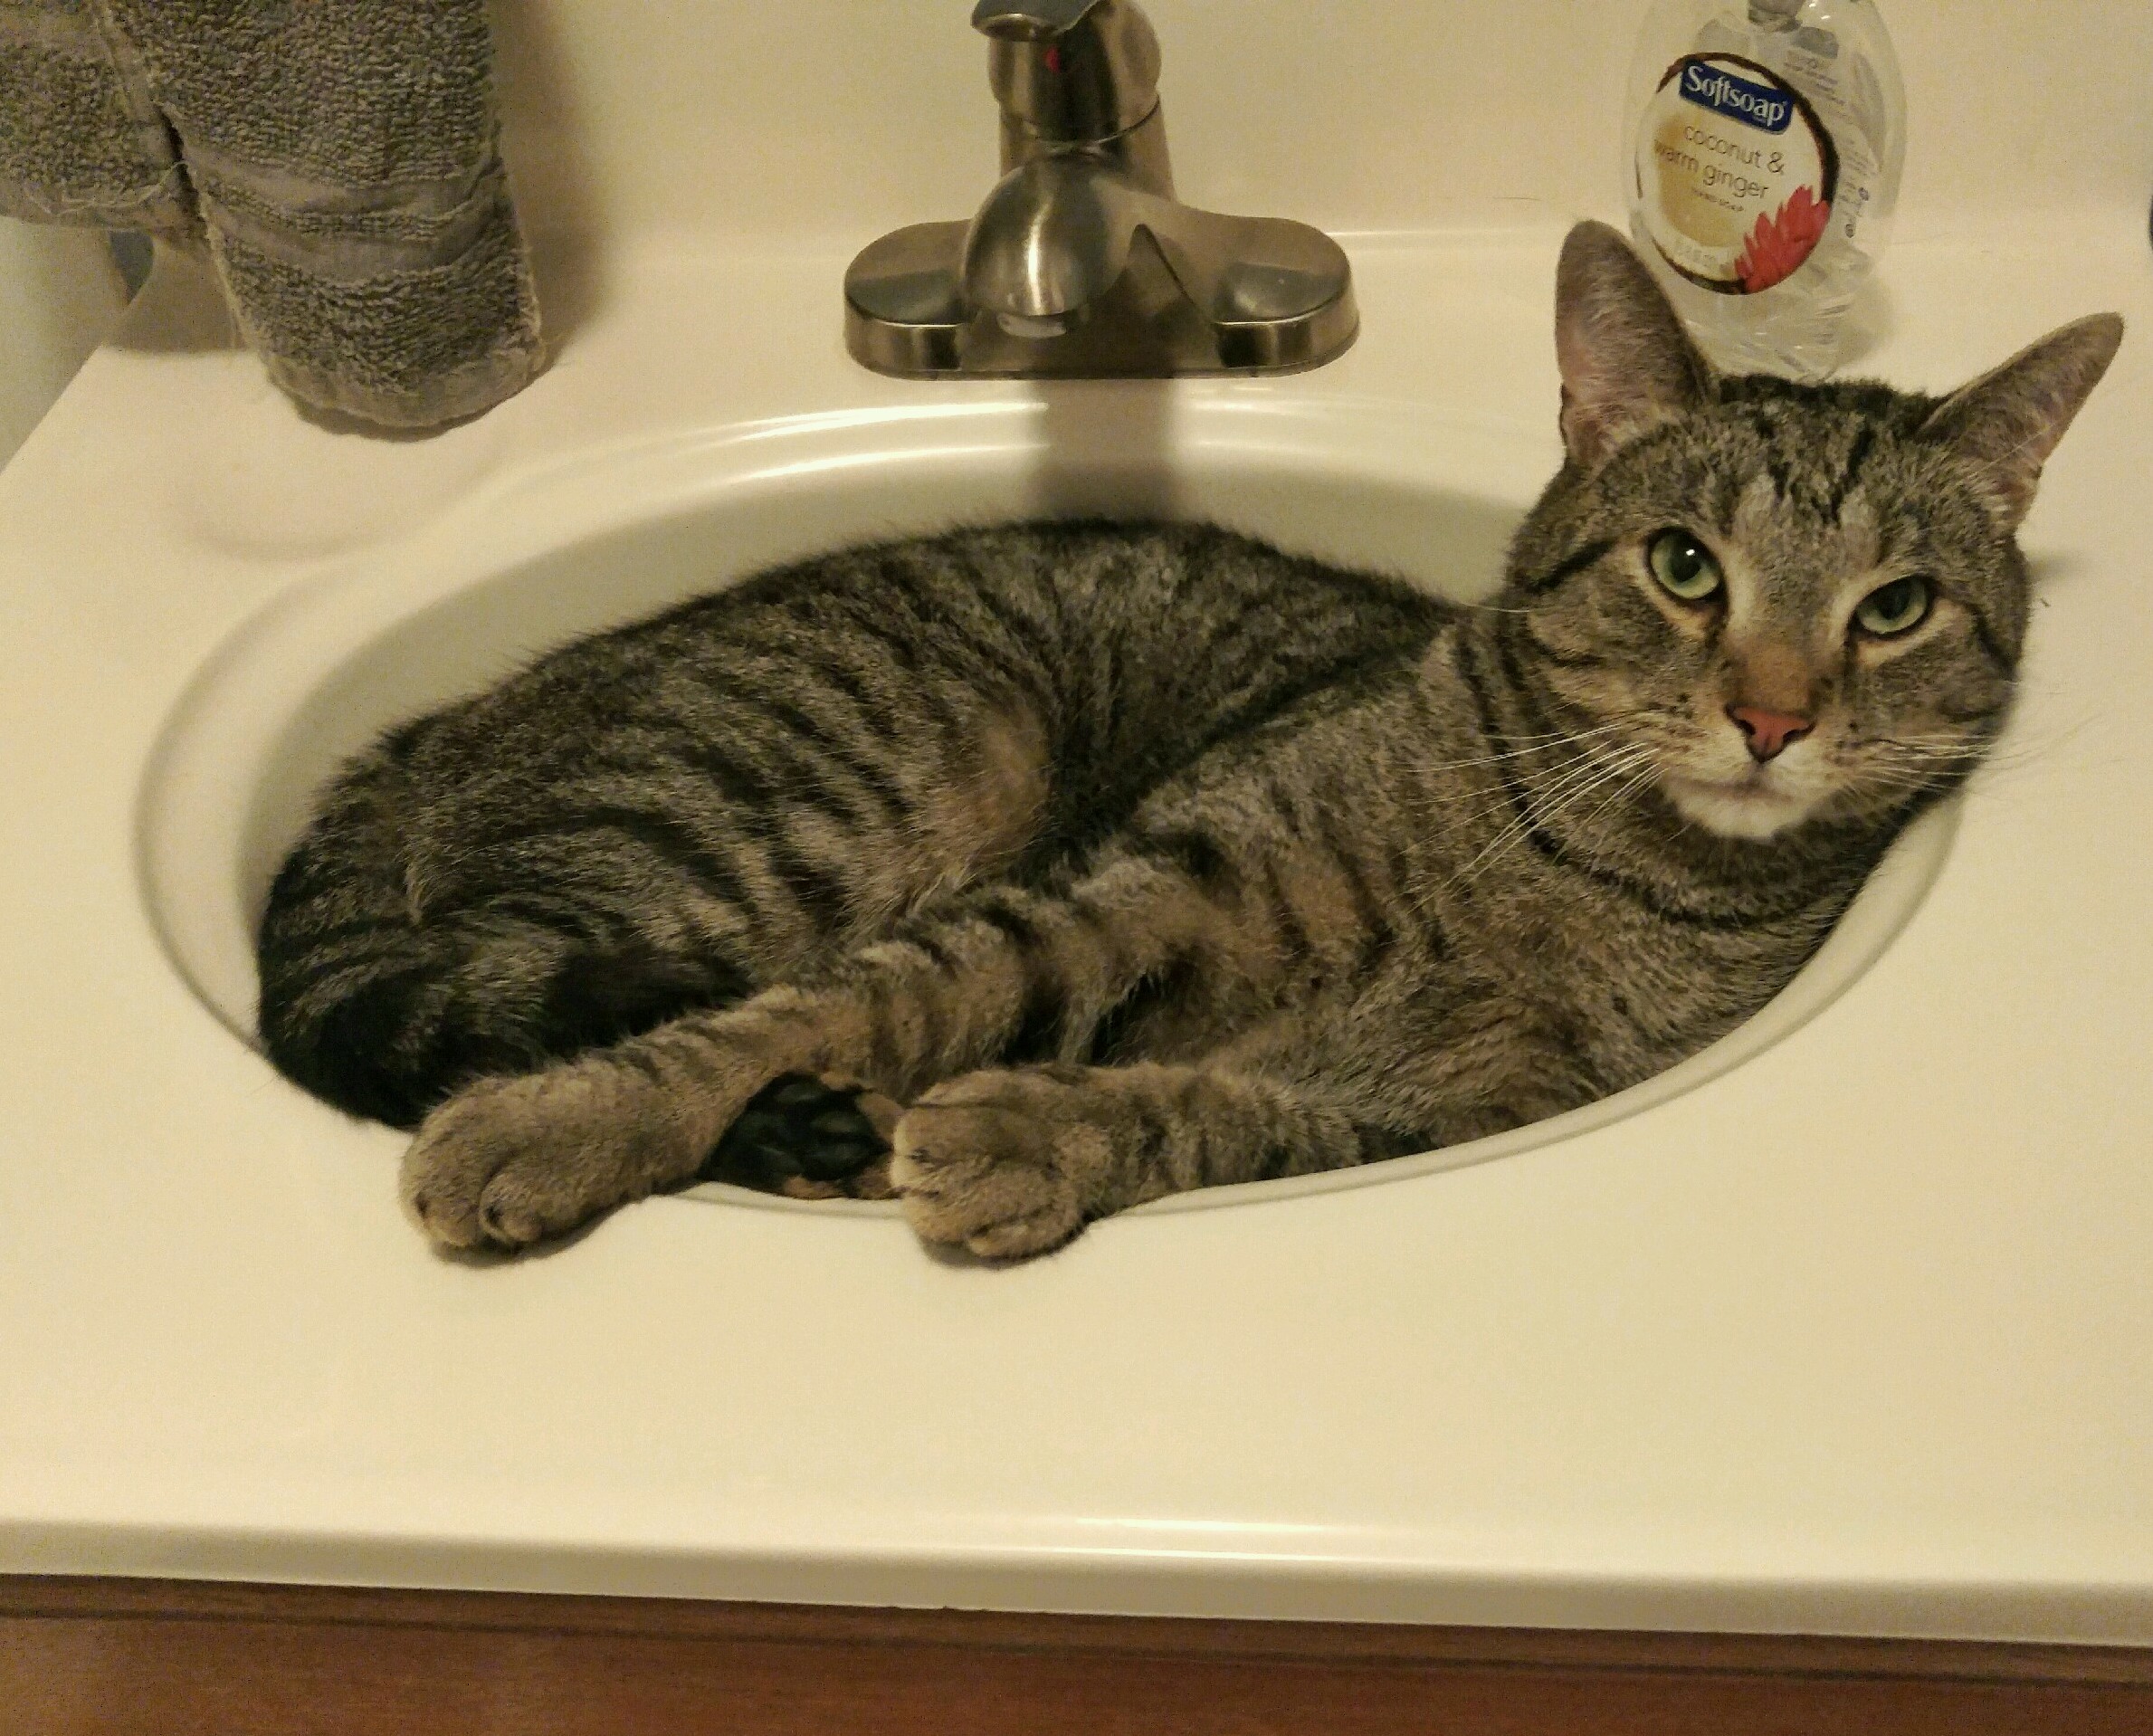 I wish i could fit in the sink, it looks so comfortable